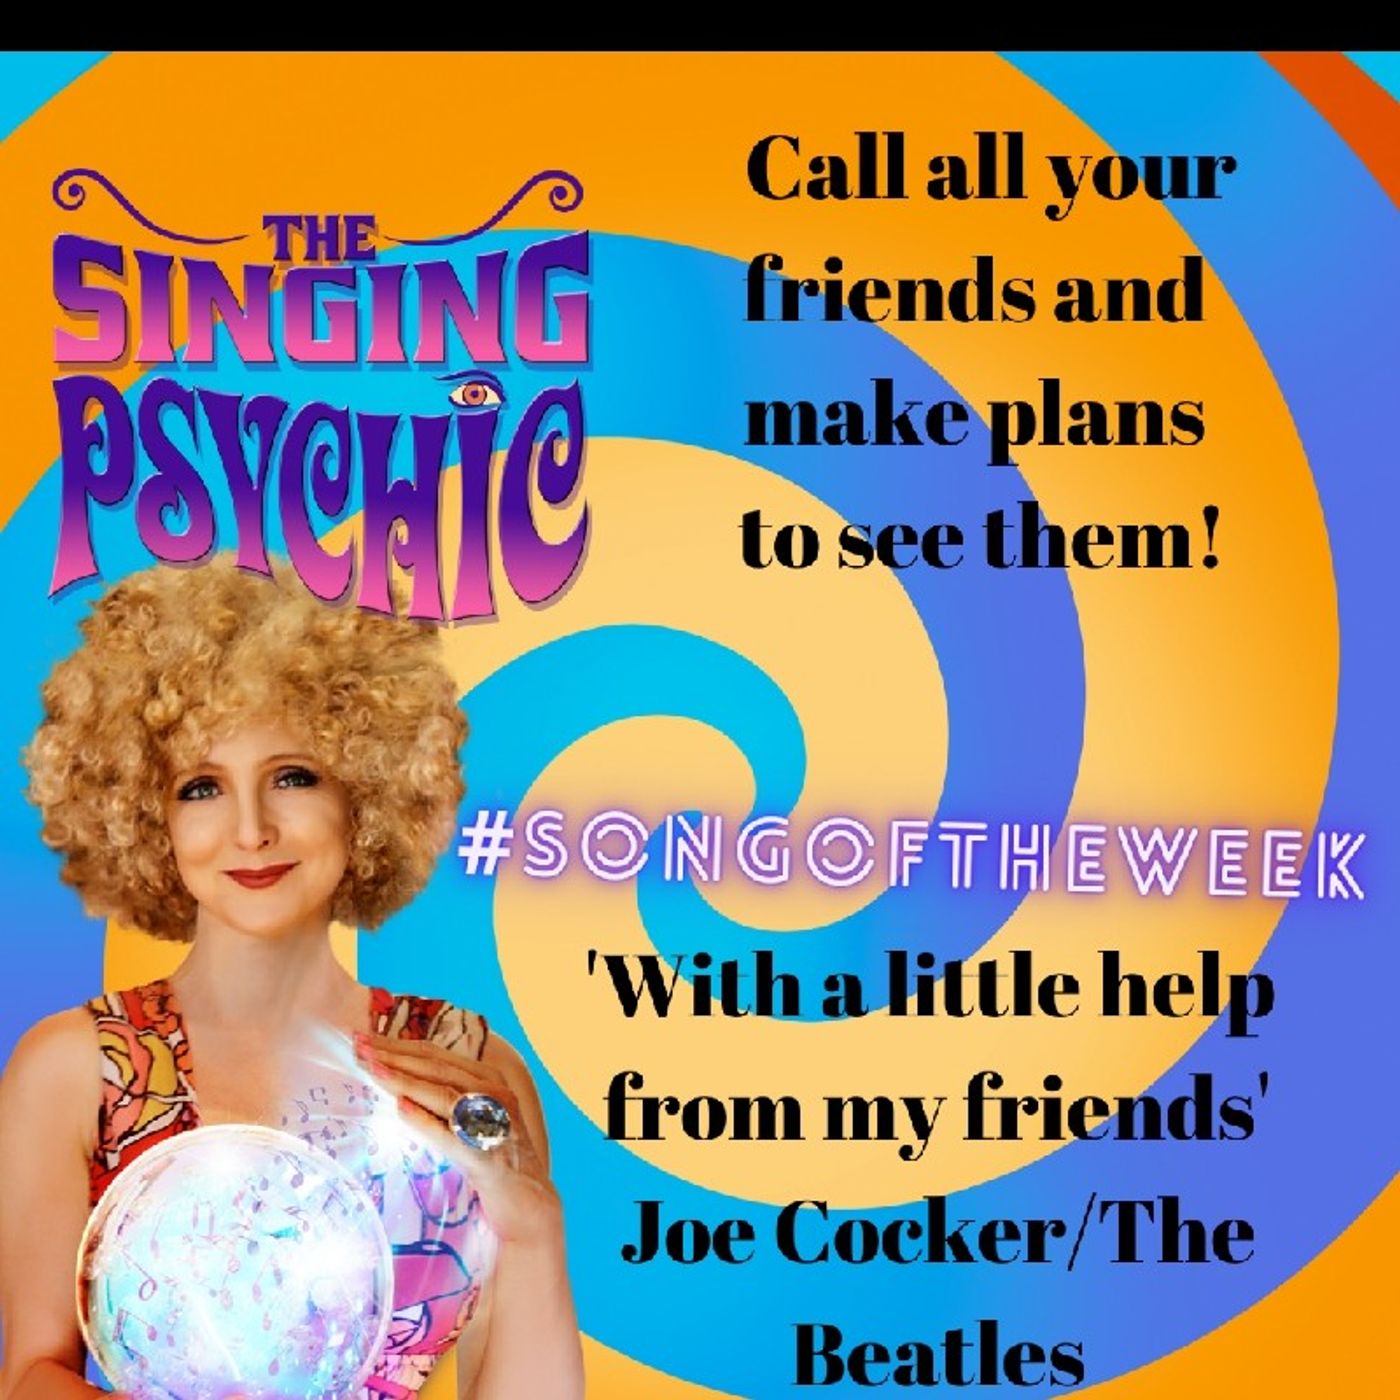 Call Your Friends To Organise Catch Ups - #SongOfTheWeek Is The Beatles/Joe Cocker With A Little Help From My Friends- The Singing Psychic